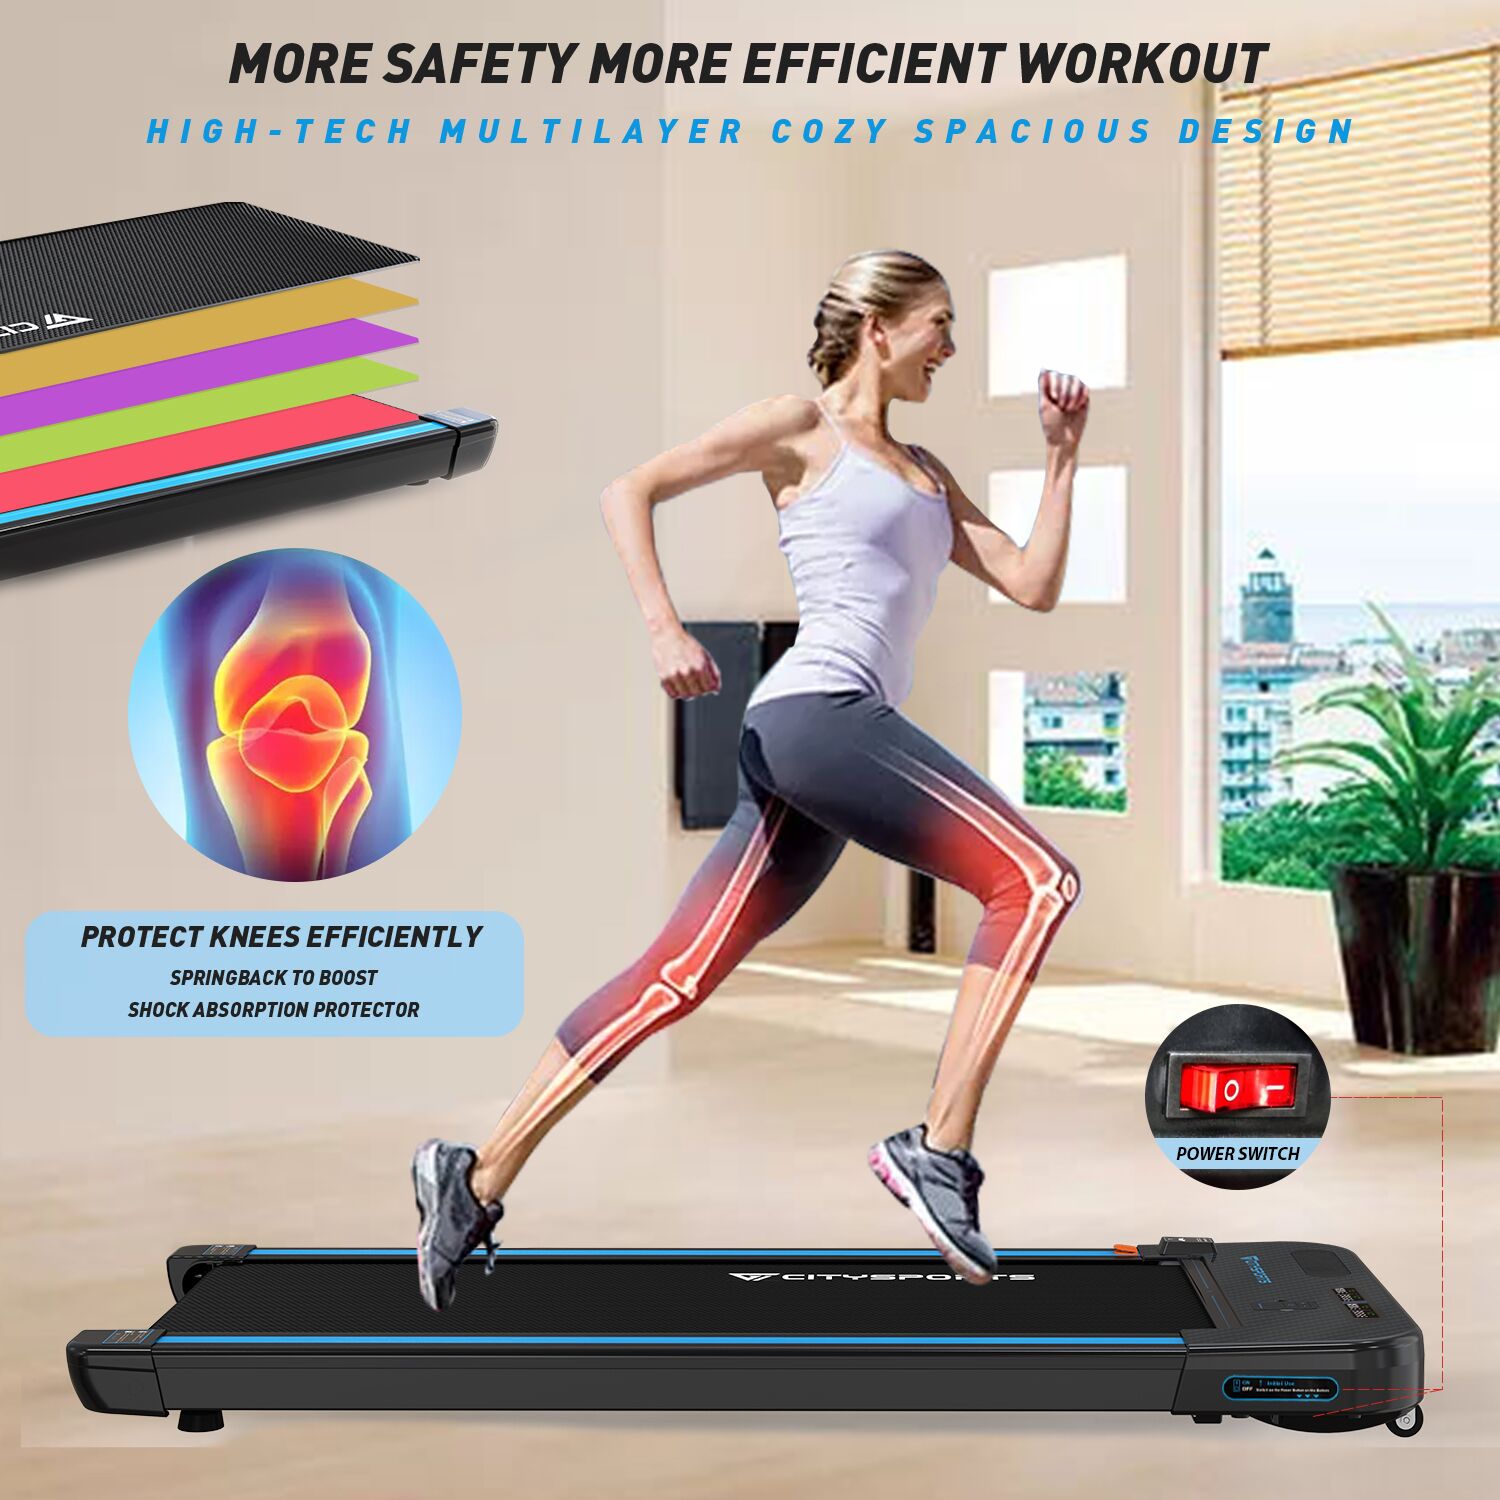 Gearstone Treadmills for Home, CITYSPORTS Walking Pad Treadmill with Audio Speakers, Slim & Portable - image 3 of 7